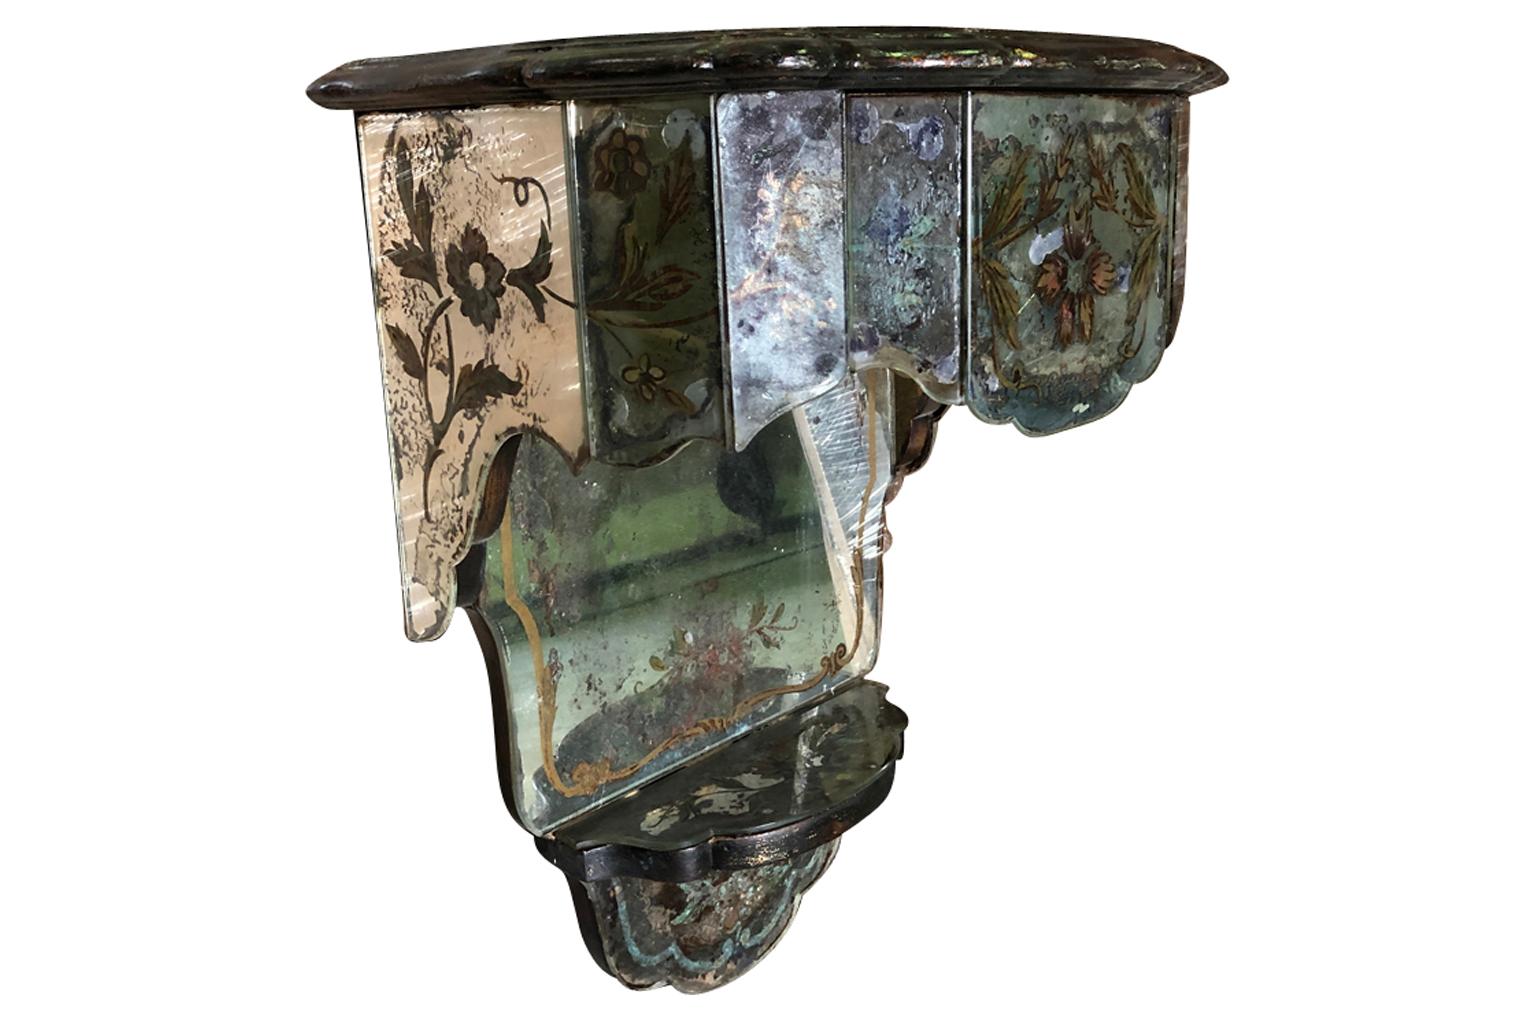 A very wonderful pair of early 20th century wall mounted Venetian mirrored consoles, each with one drawer and lovely floral paintings. Very chic.